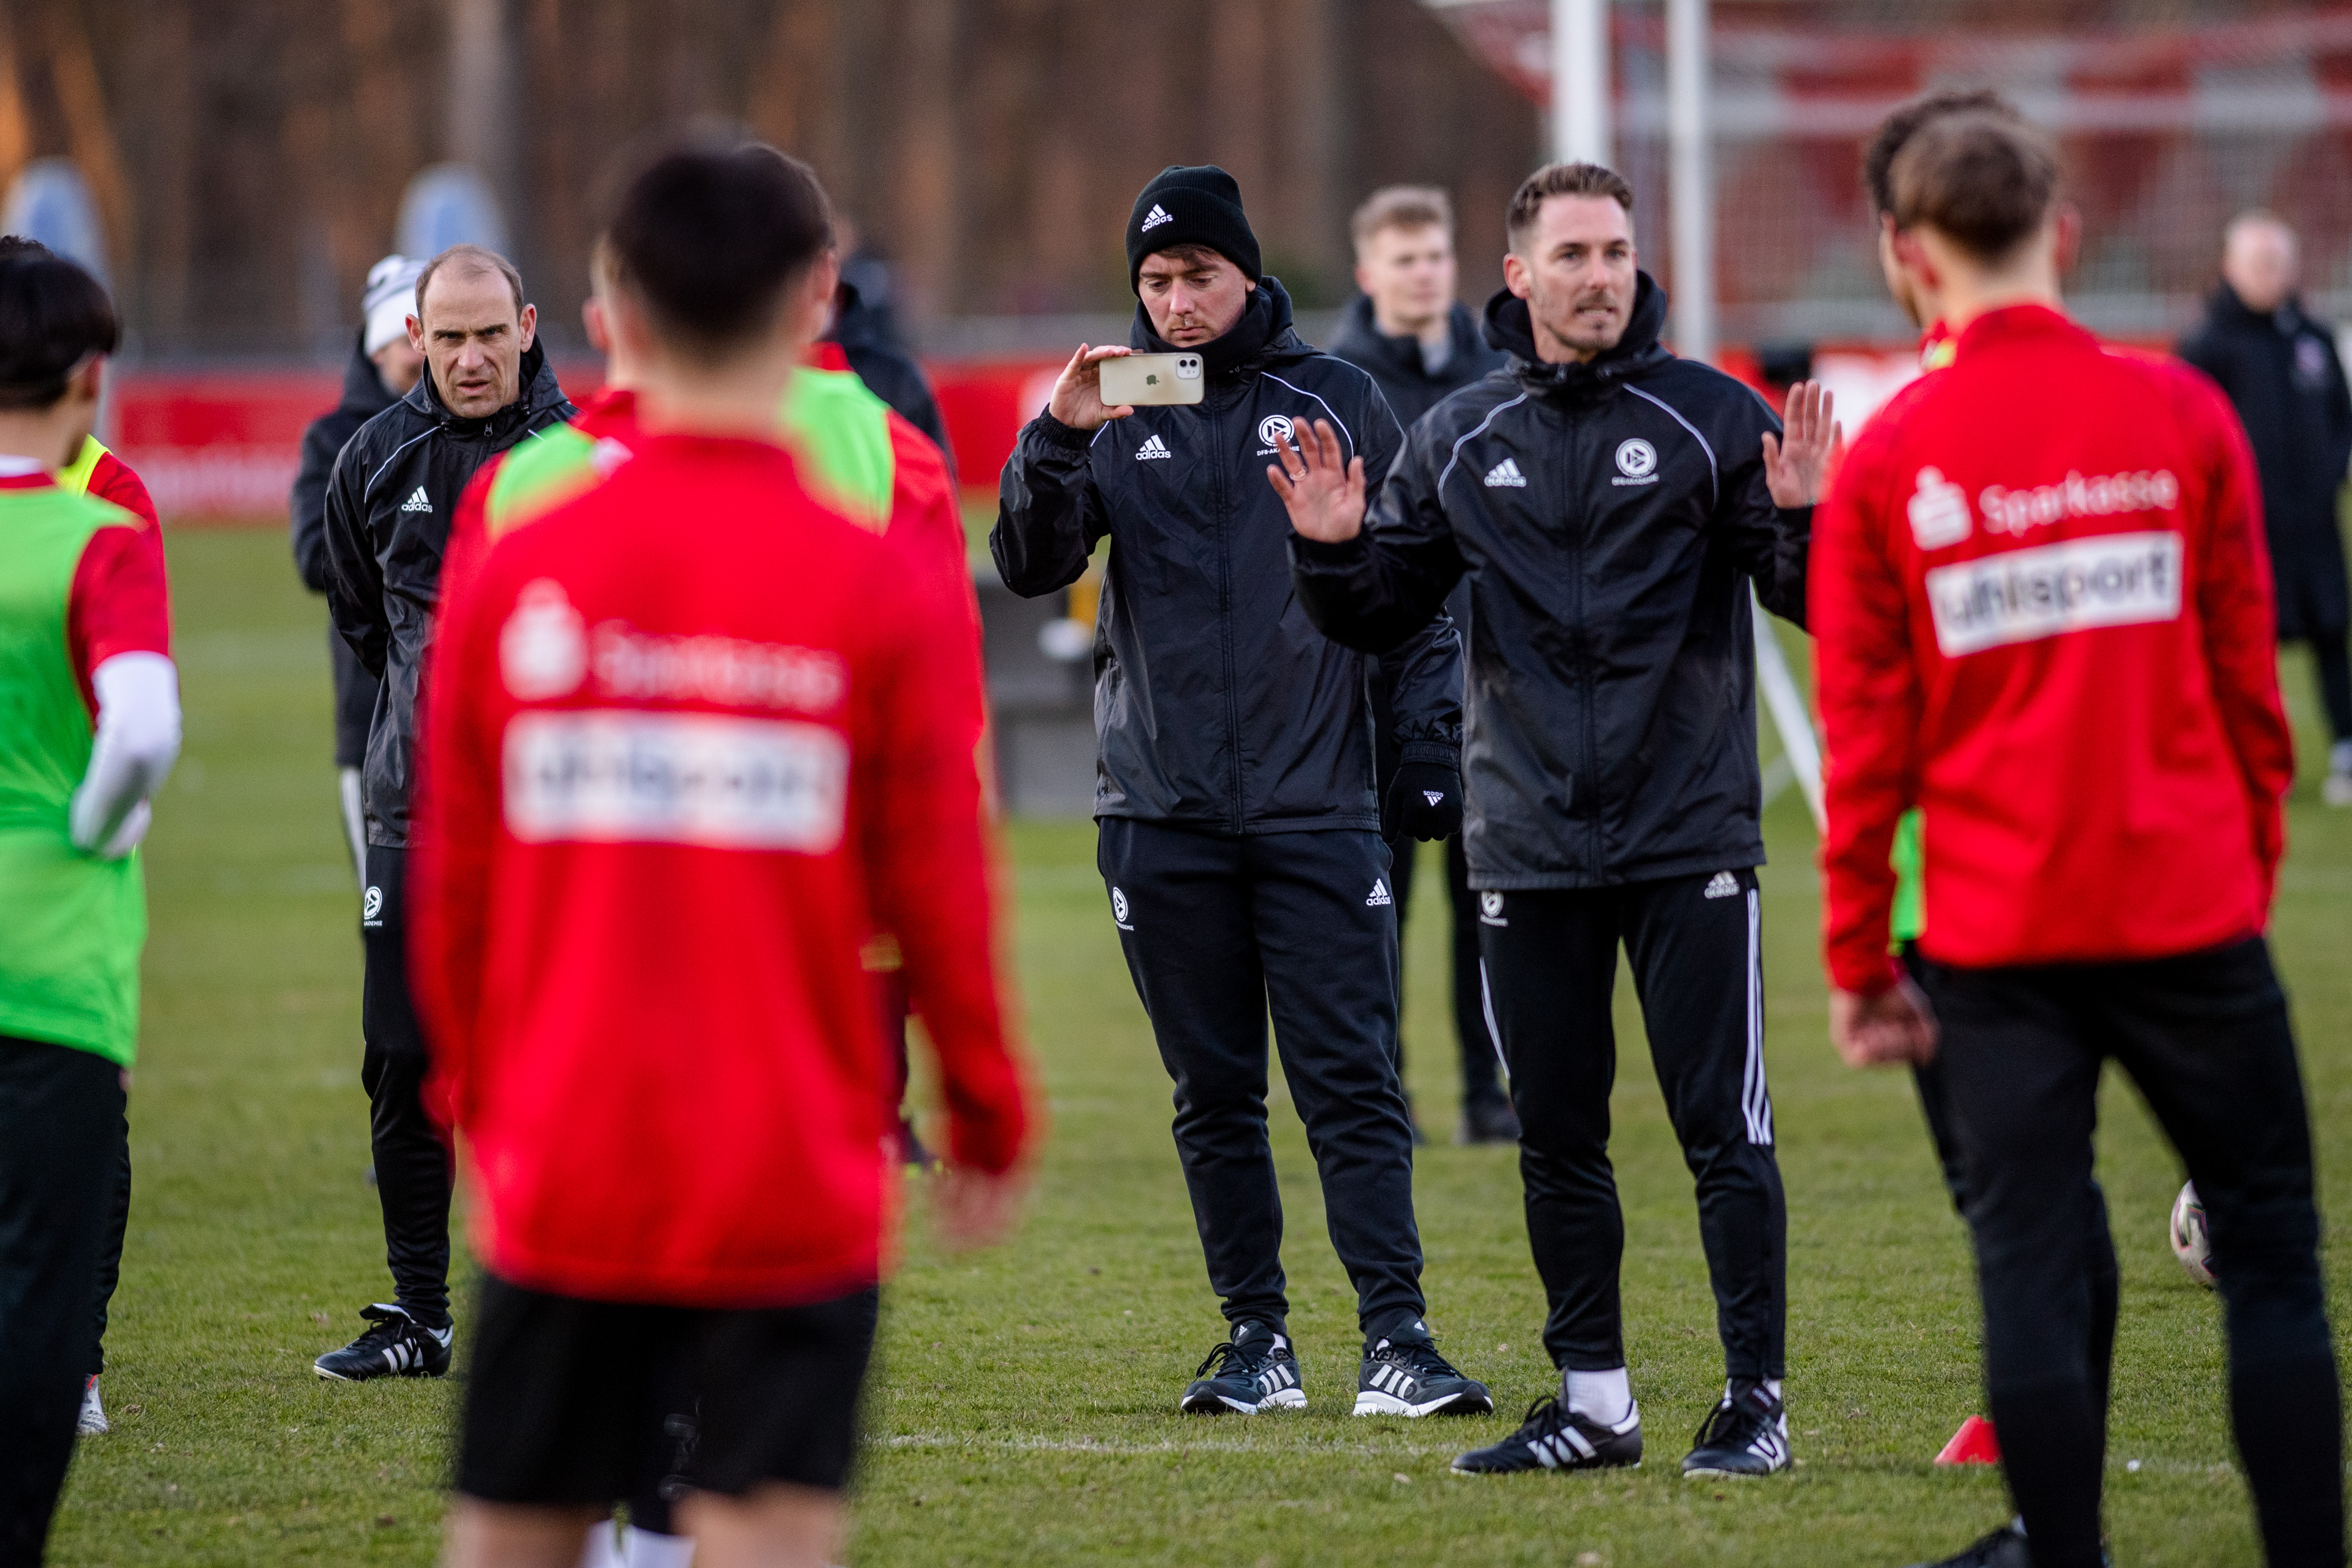 COLOGNE, GERMANY - MARCH 07: Participants during a Pro Licence Coaching Course at the Giessbock Stadium on March 7, 2022 in Cologne, Germany. (Photo by Neil Baynes/Getty Images for DFB)